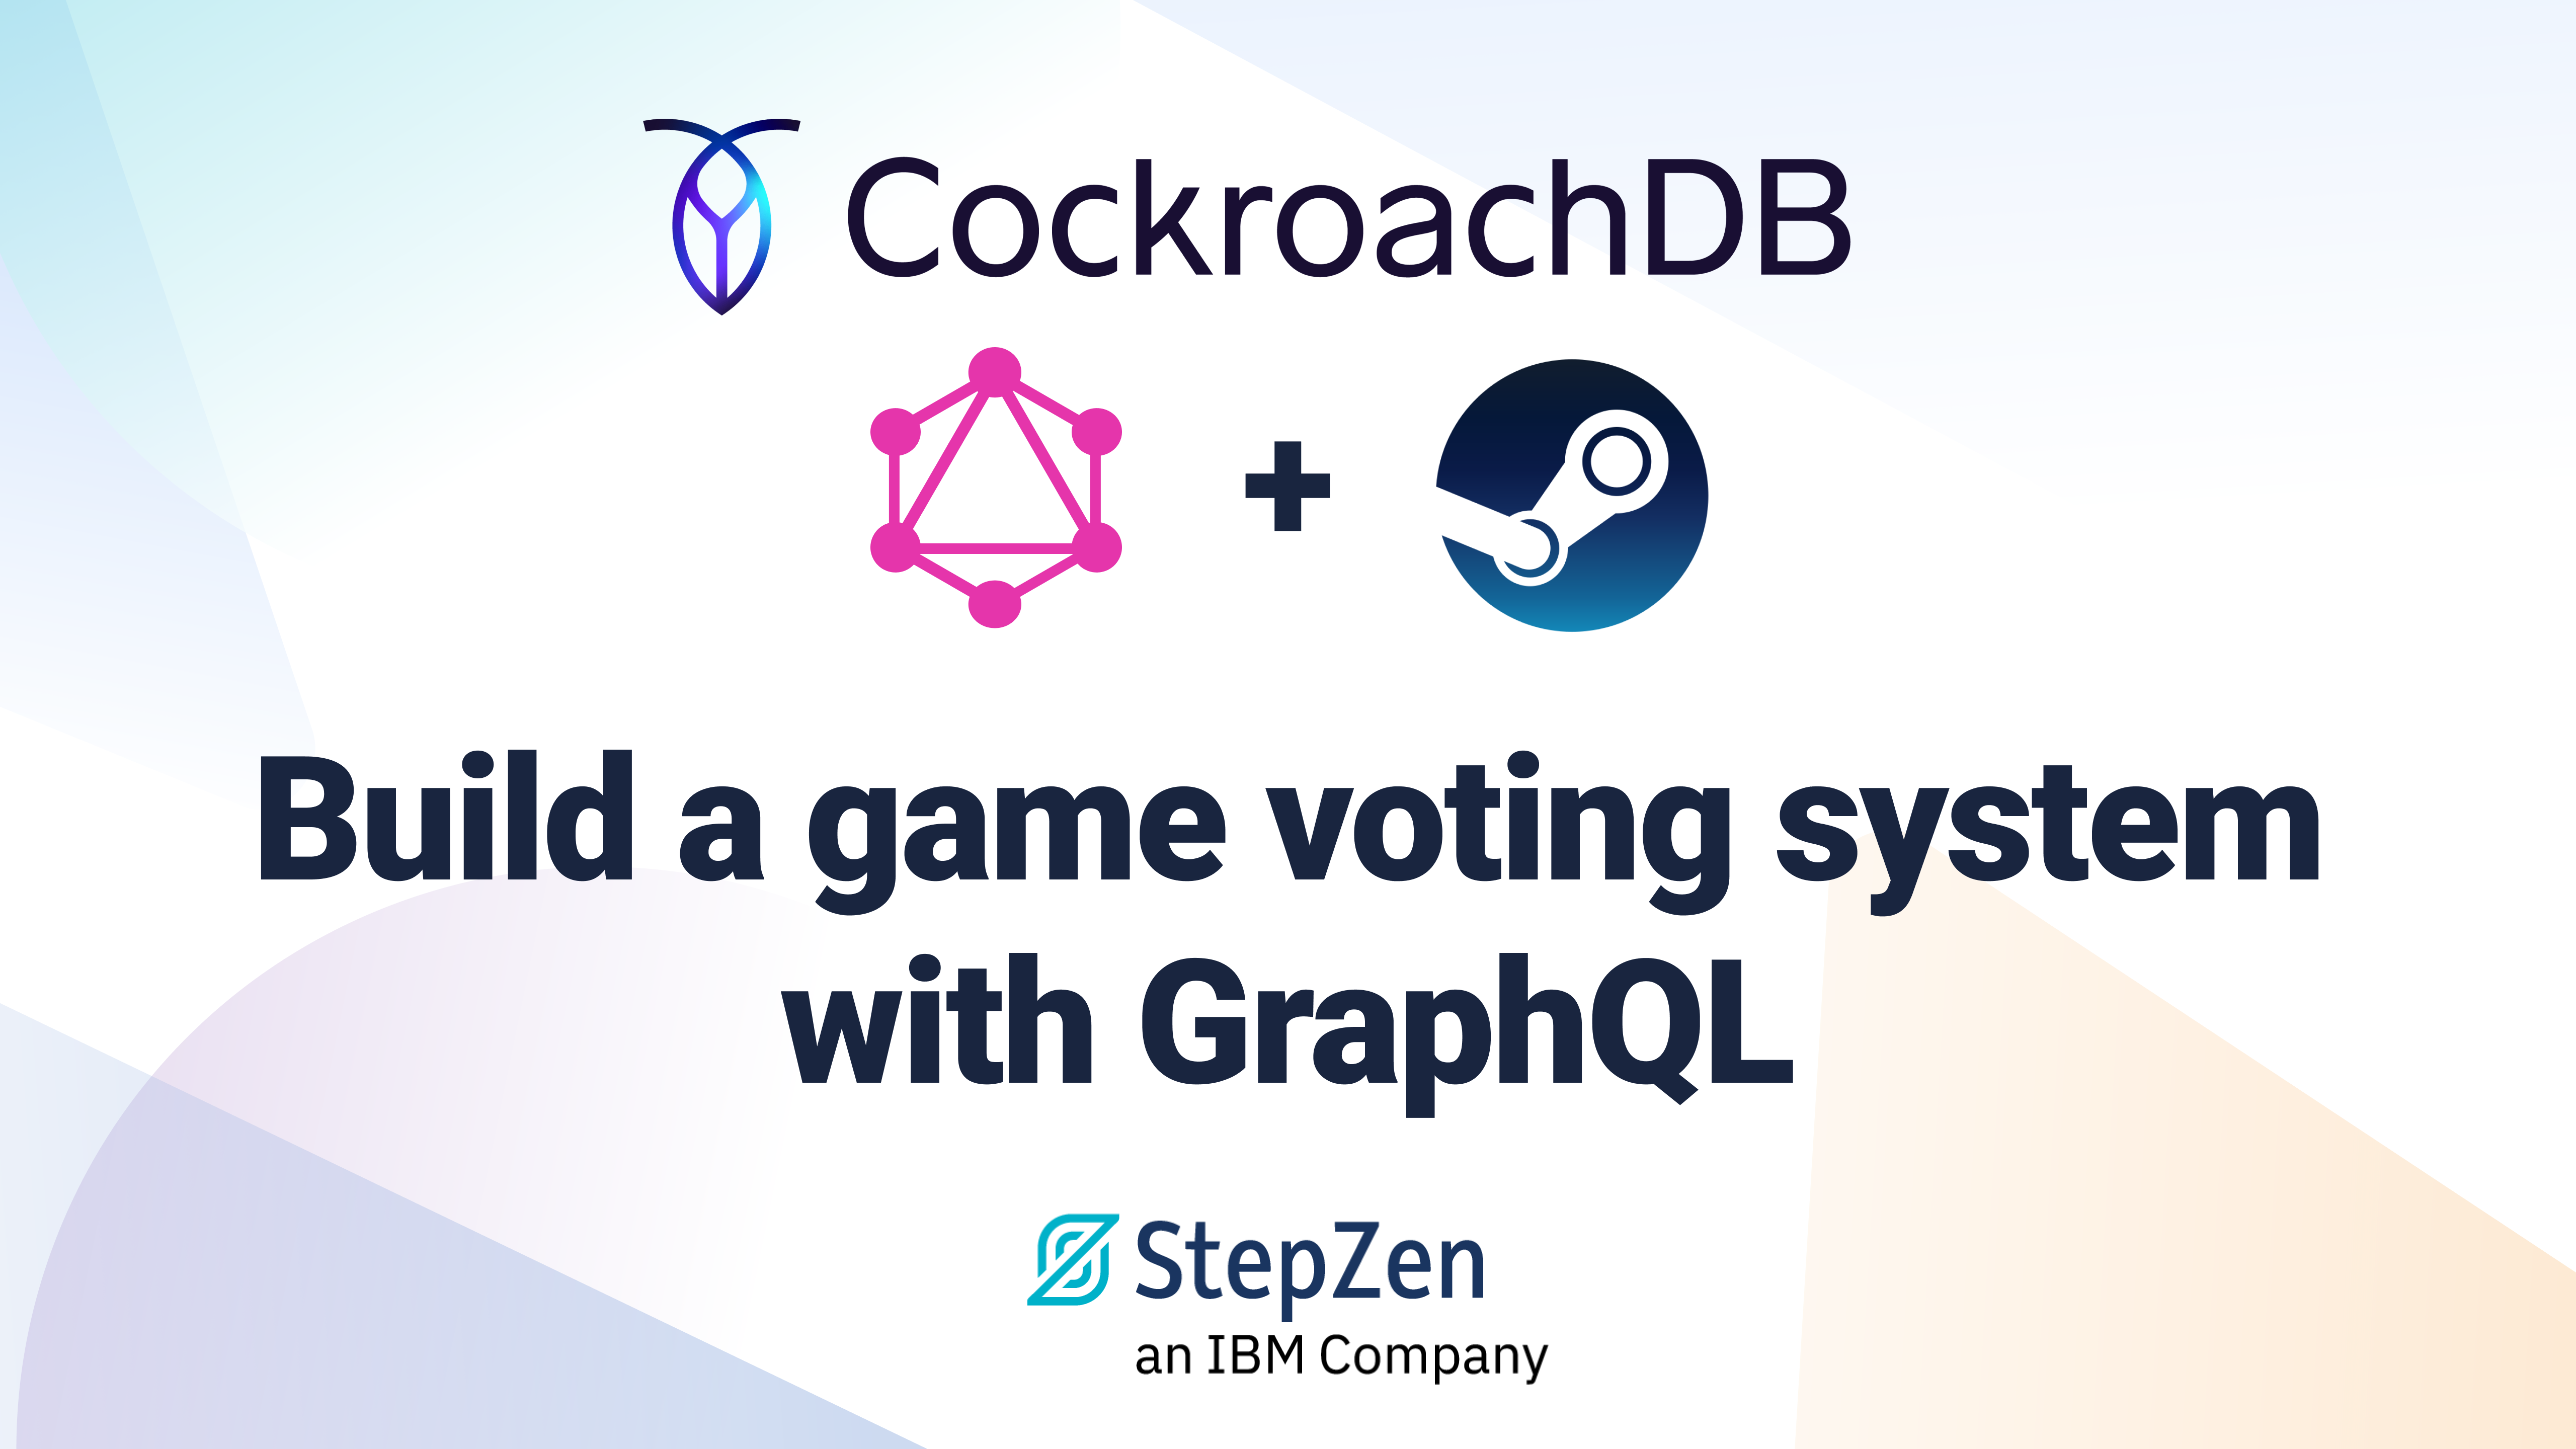 Build a game voting system using CockroachDB, Steam and StepZen